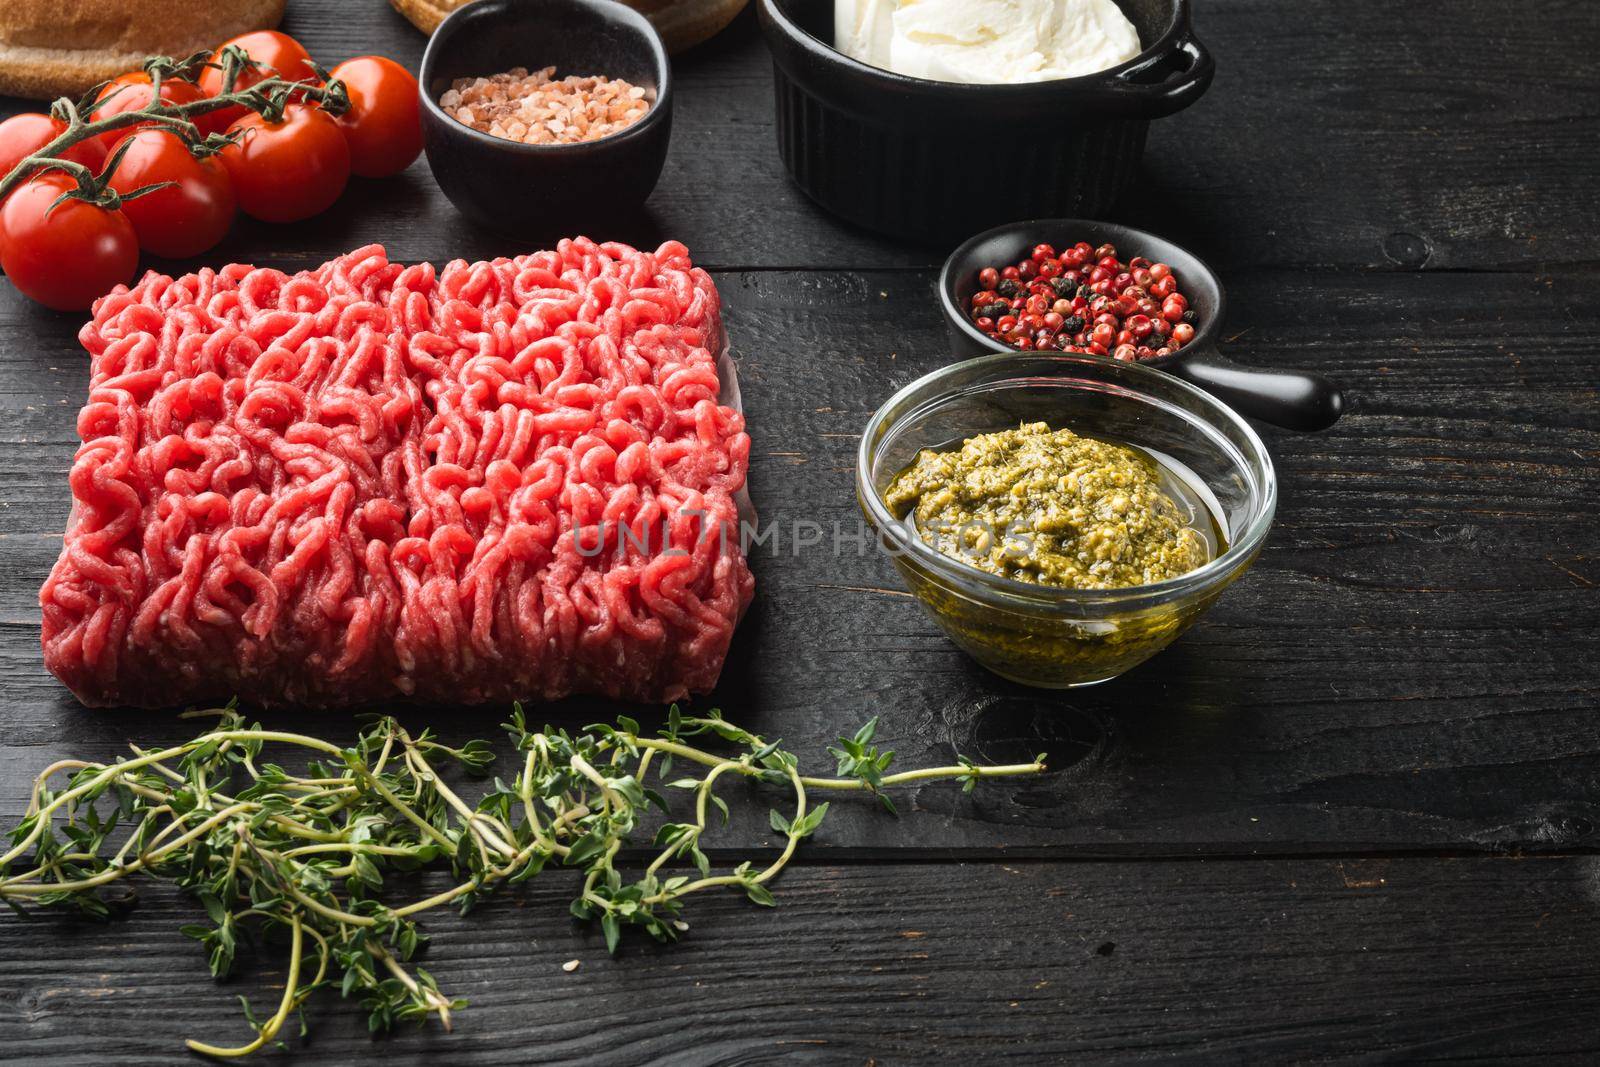 Raw meatballs made from ground beef ingredients, on black wooden table background by Ilianesolenyi